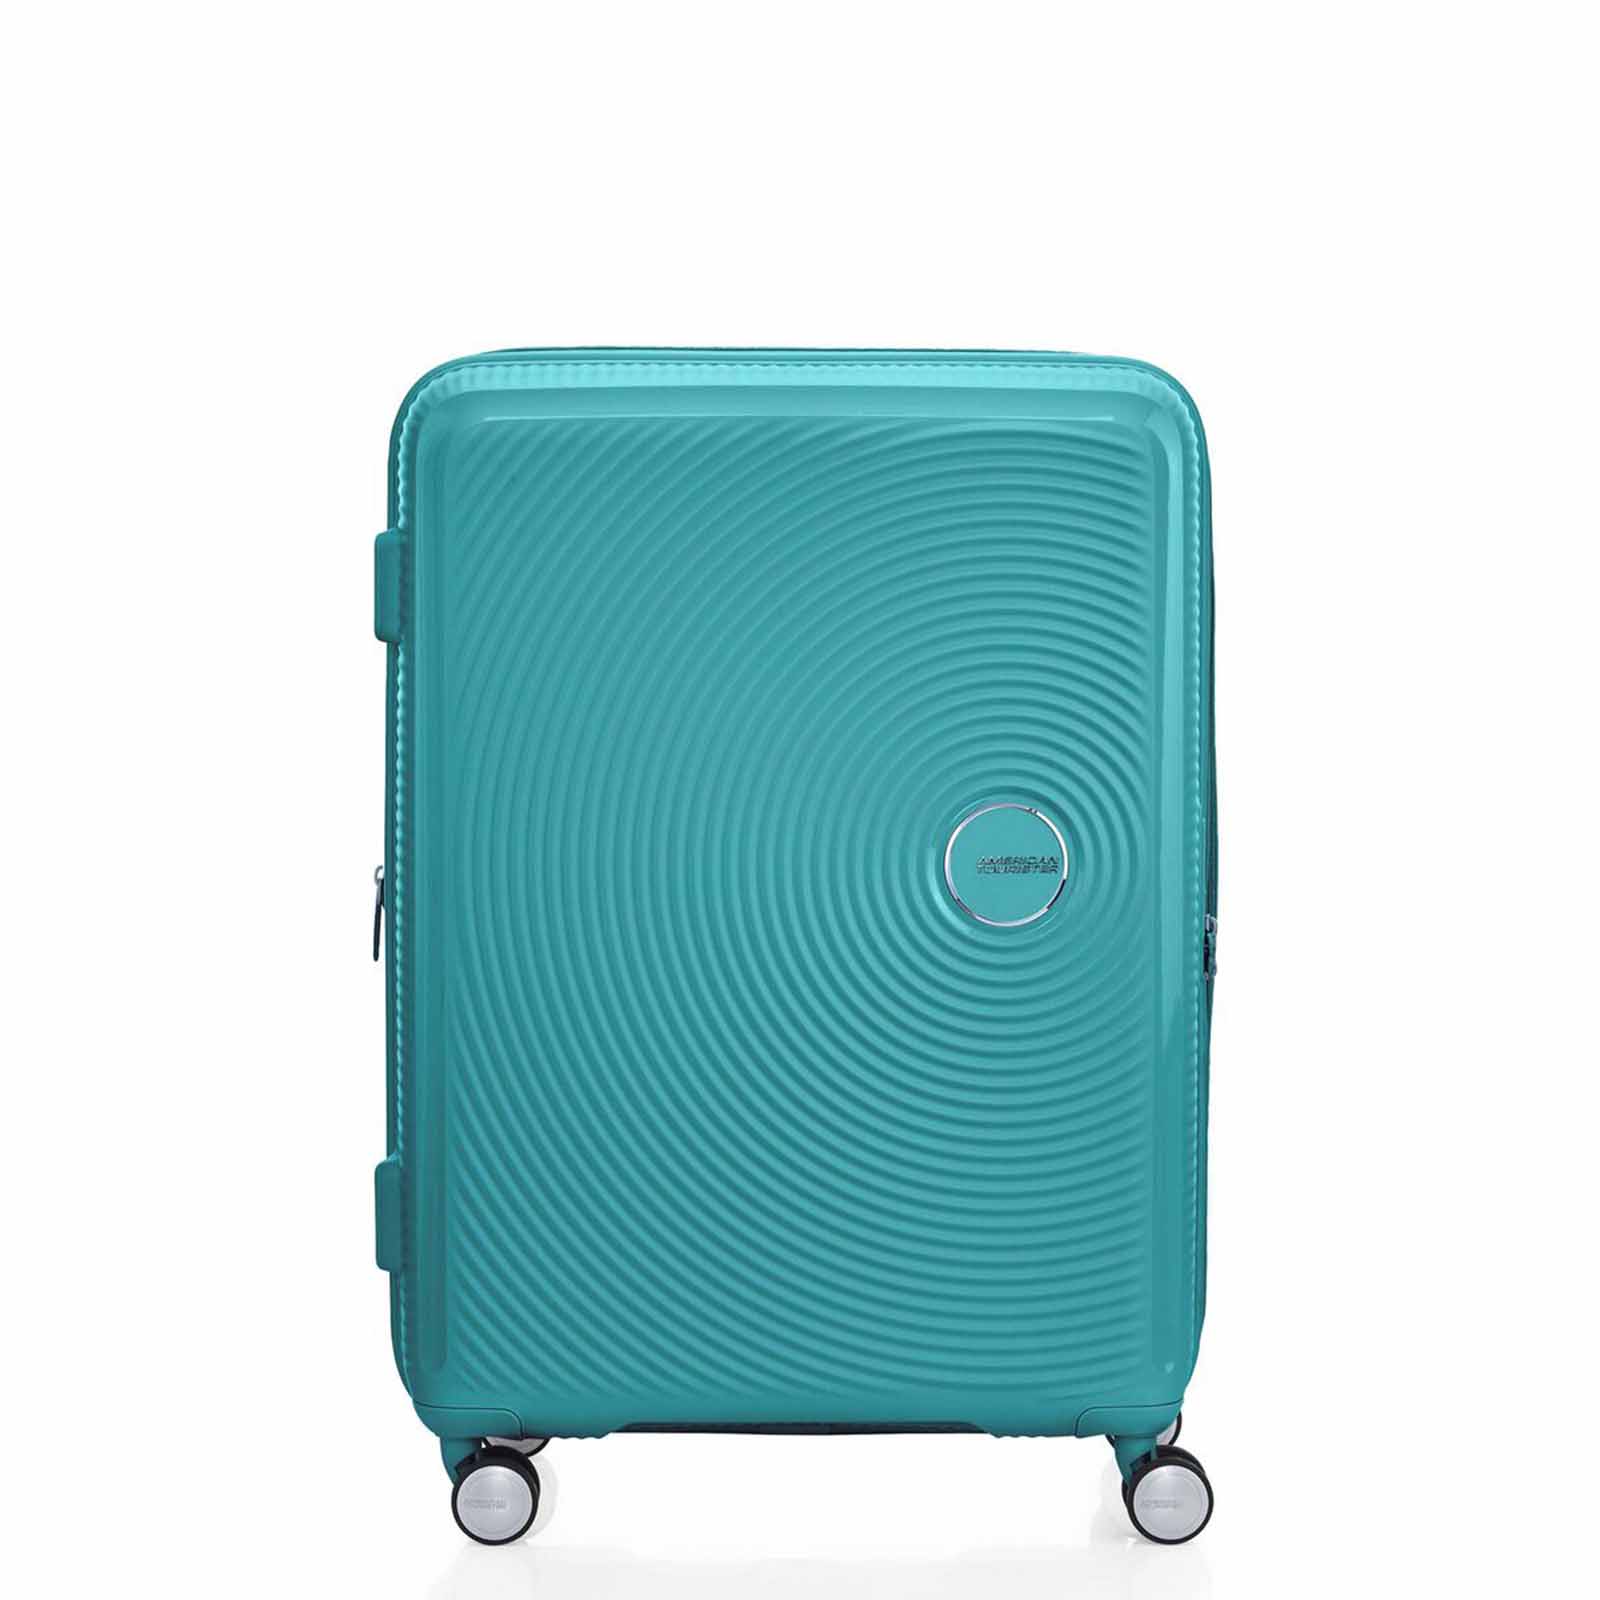 American-Tourister-Curio-2-69cm-Suitcase-Jade-Green-Front